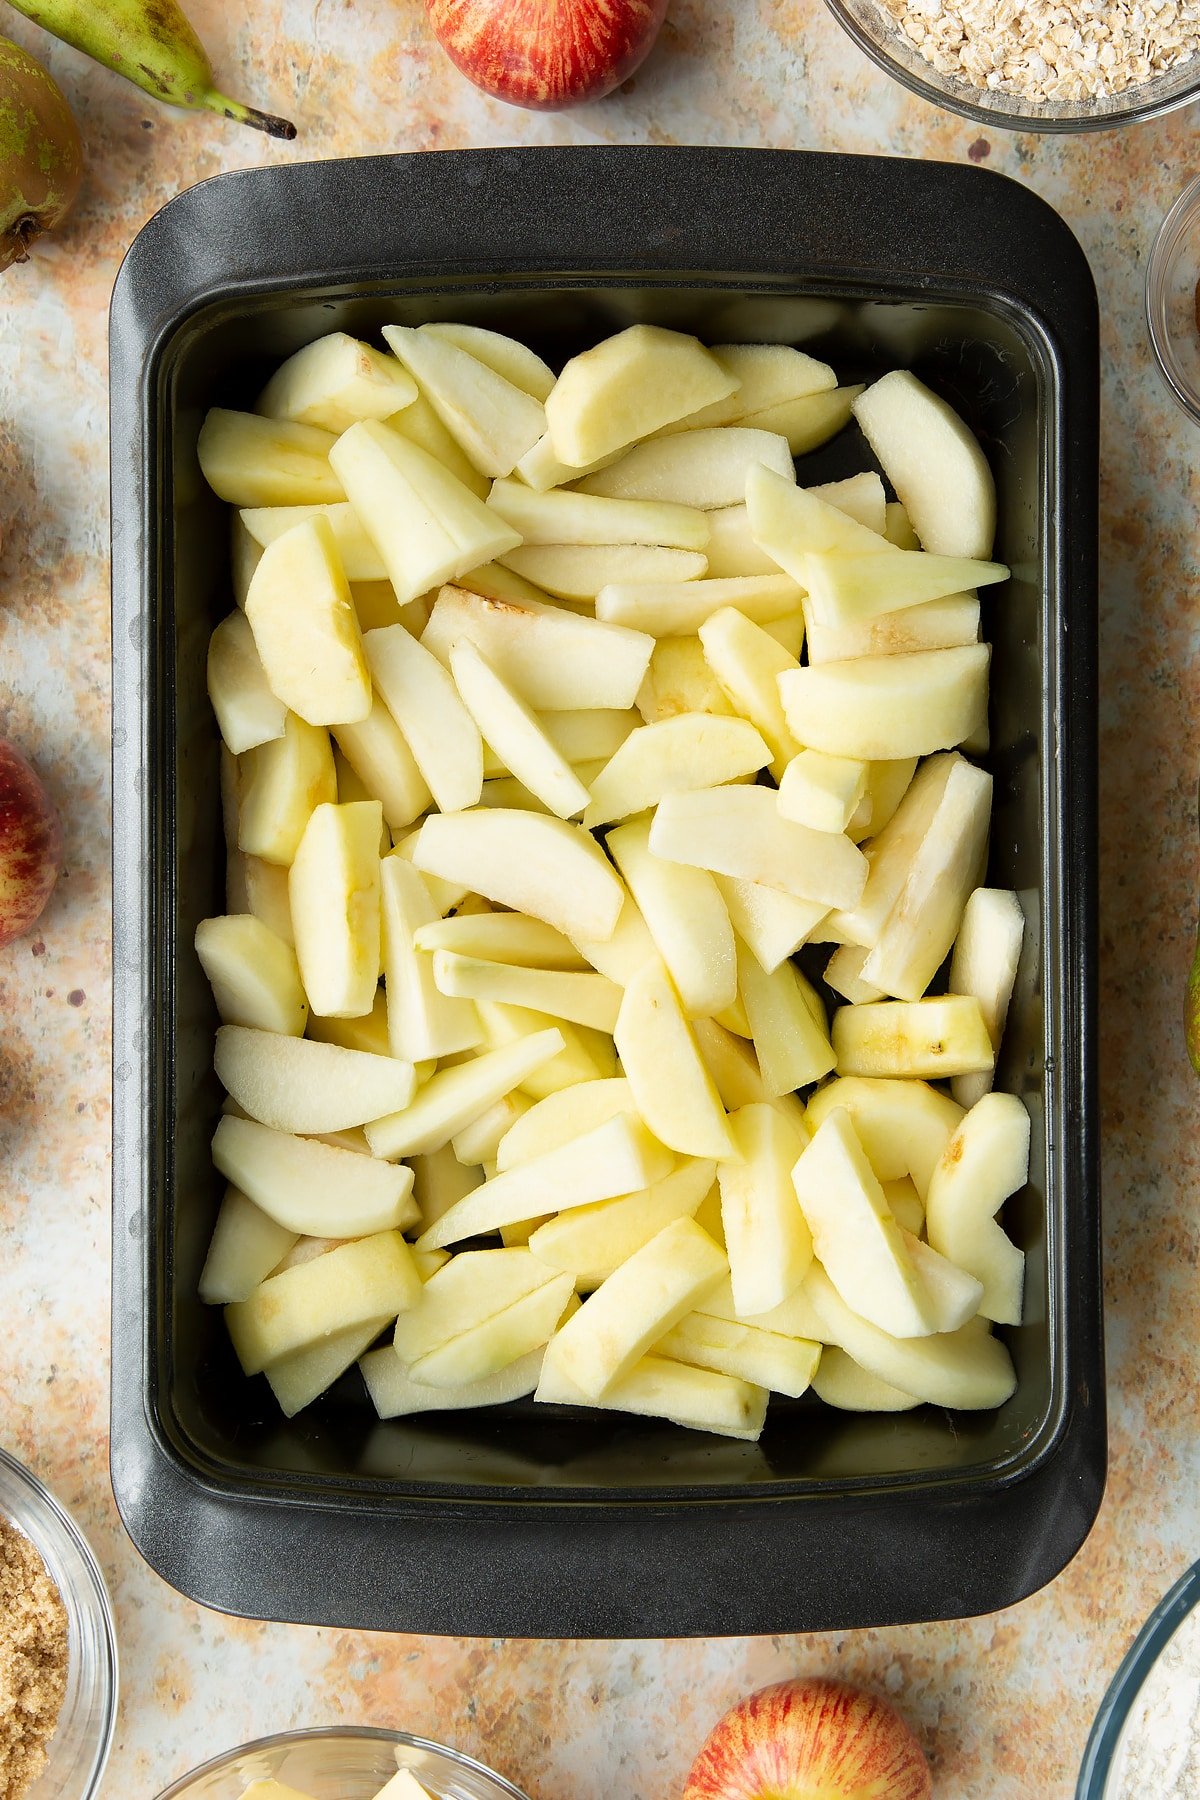 Peeled apple and pear wedges in a greased tray.